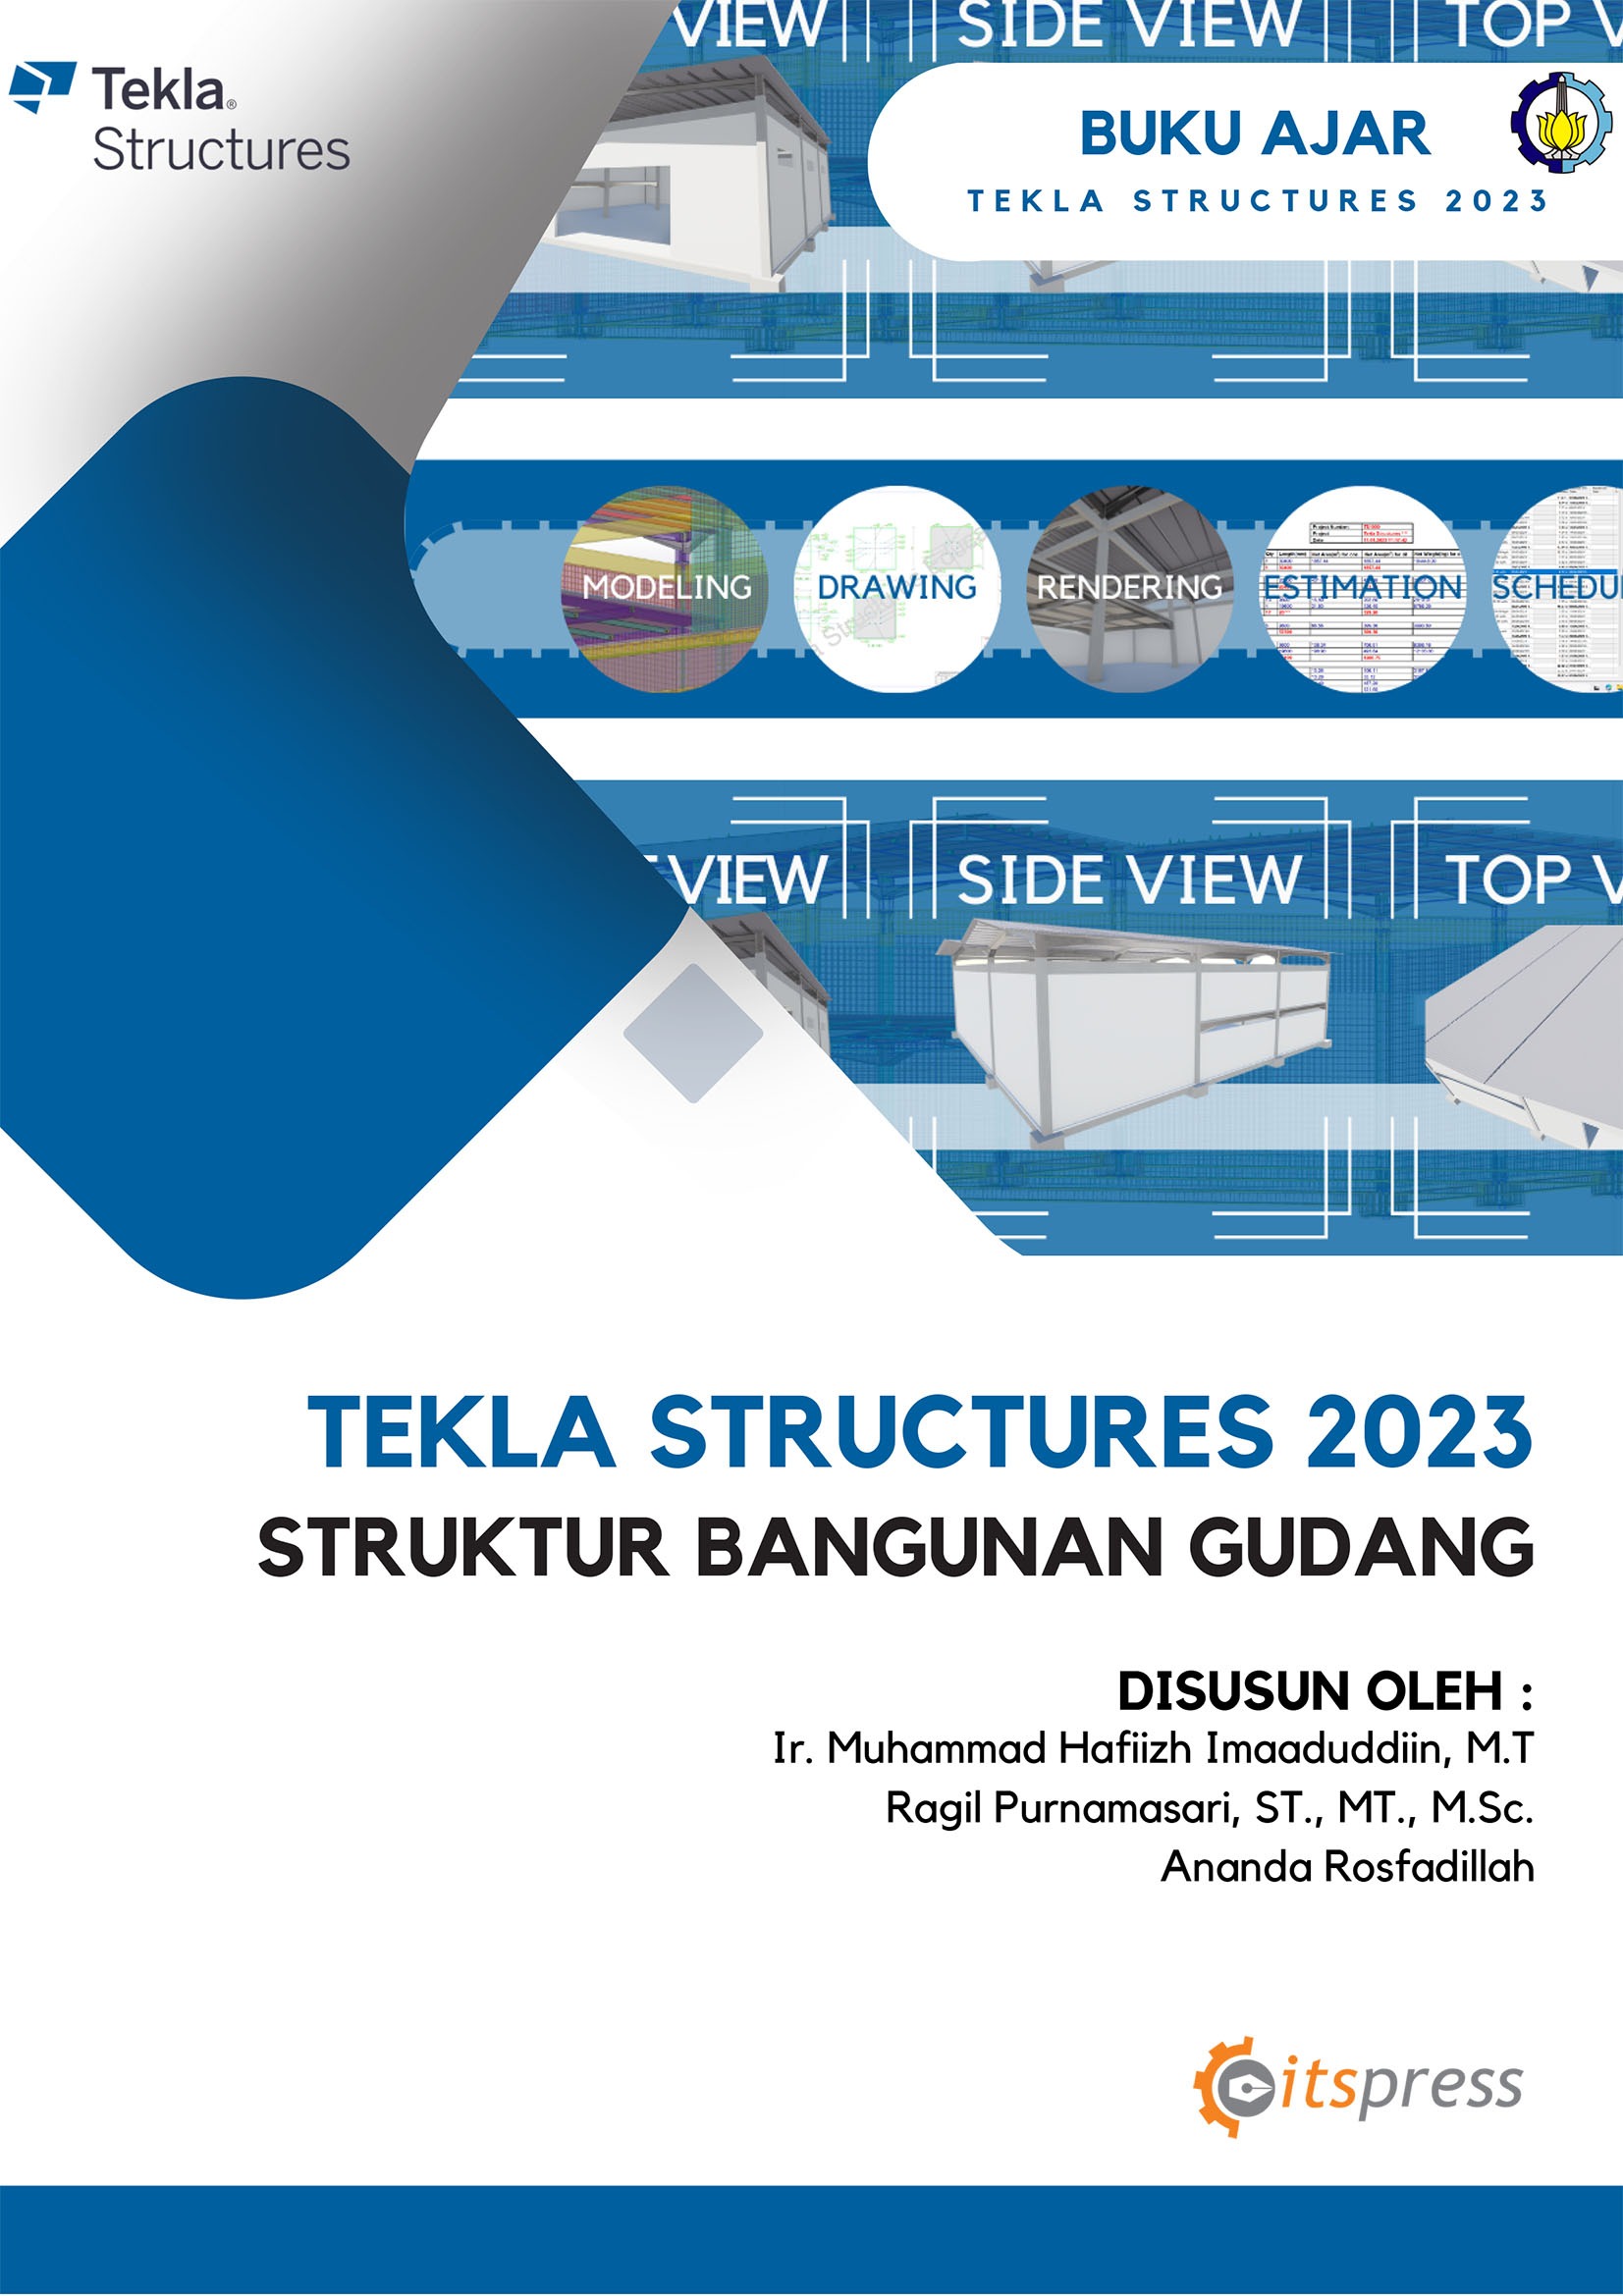 Tekla Structures 2023 SP6 instal the new version for windows